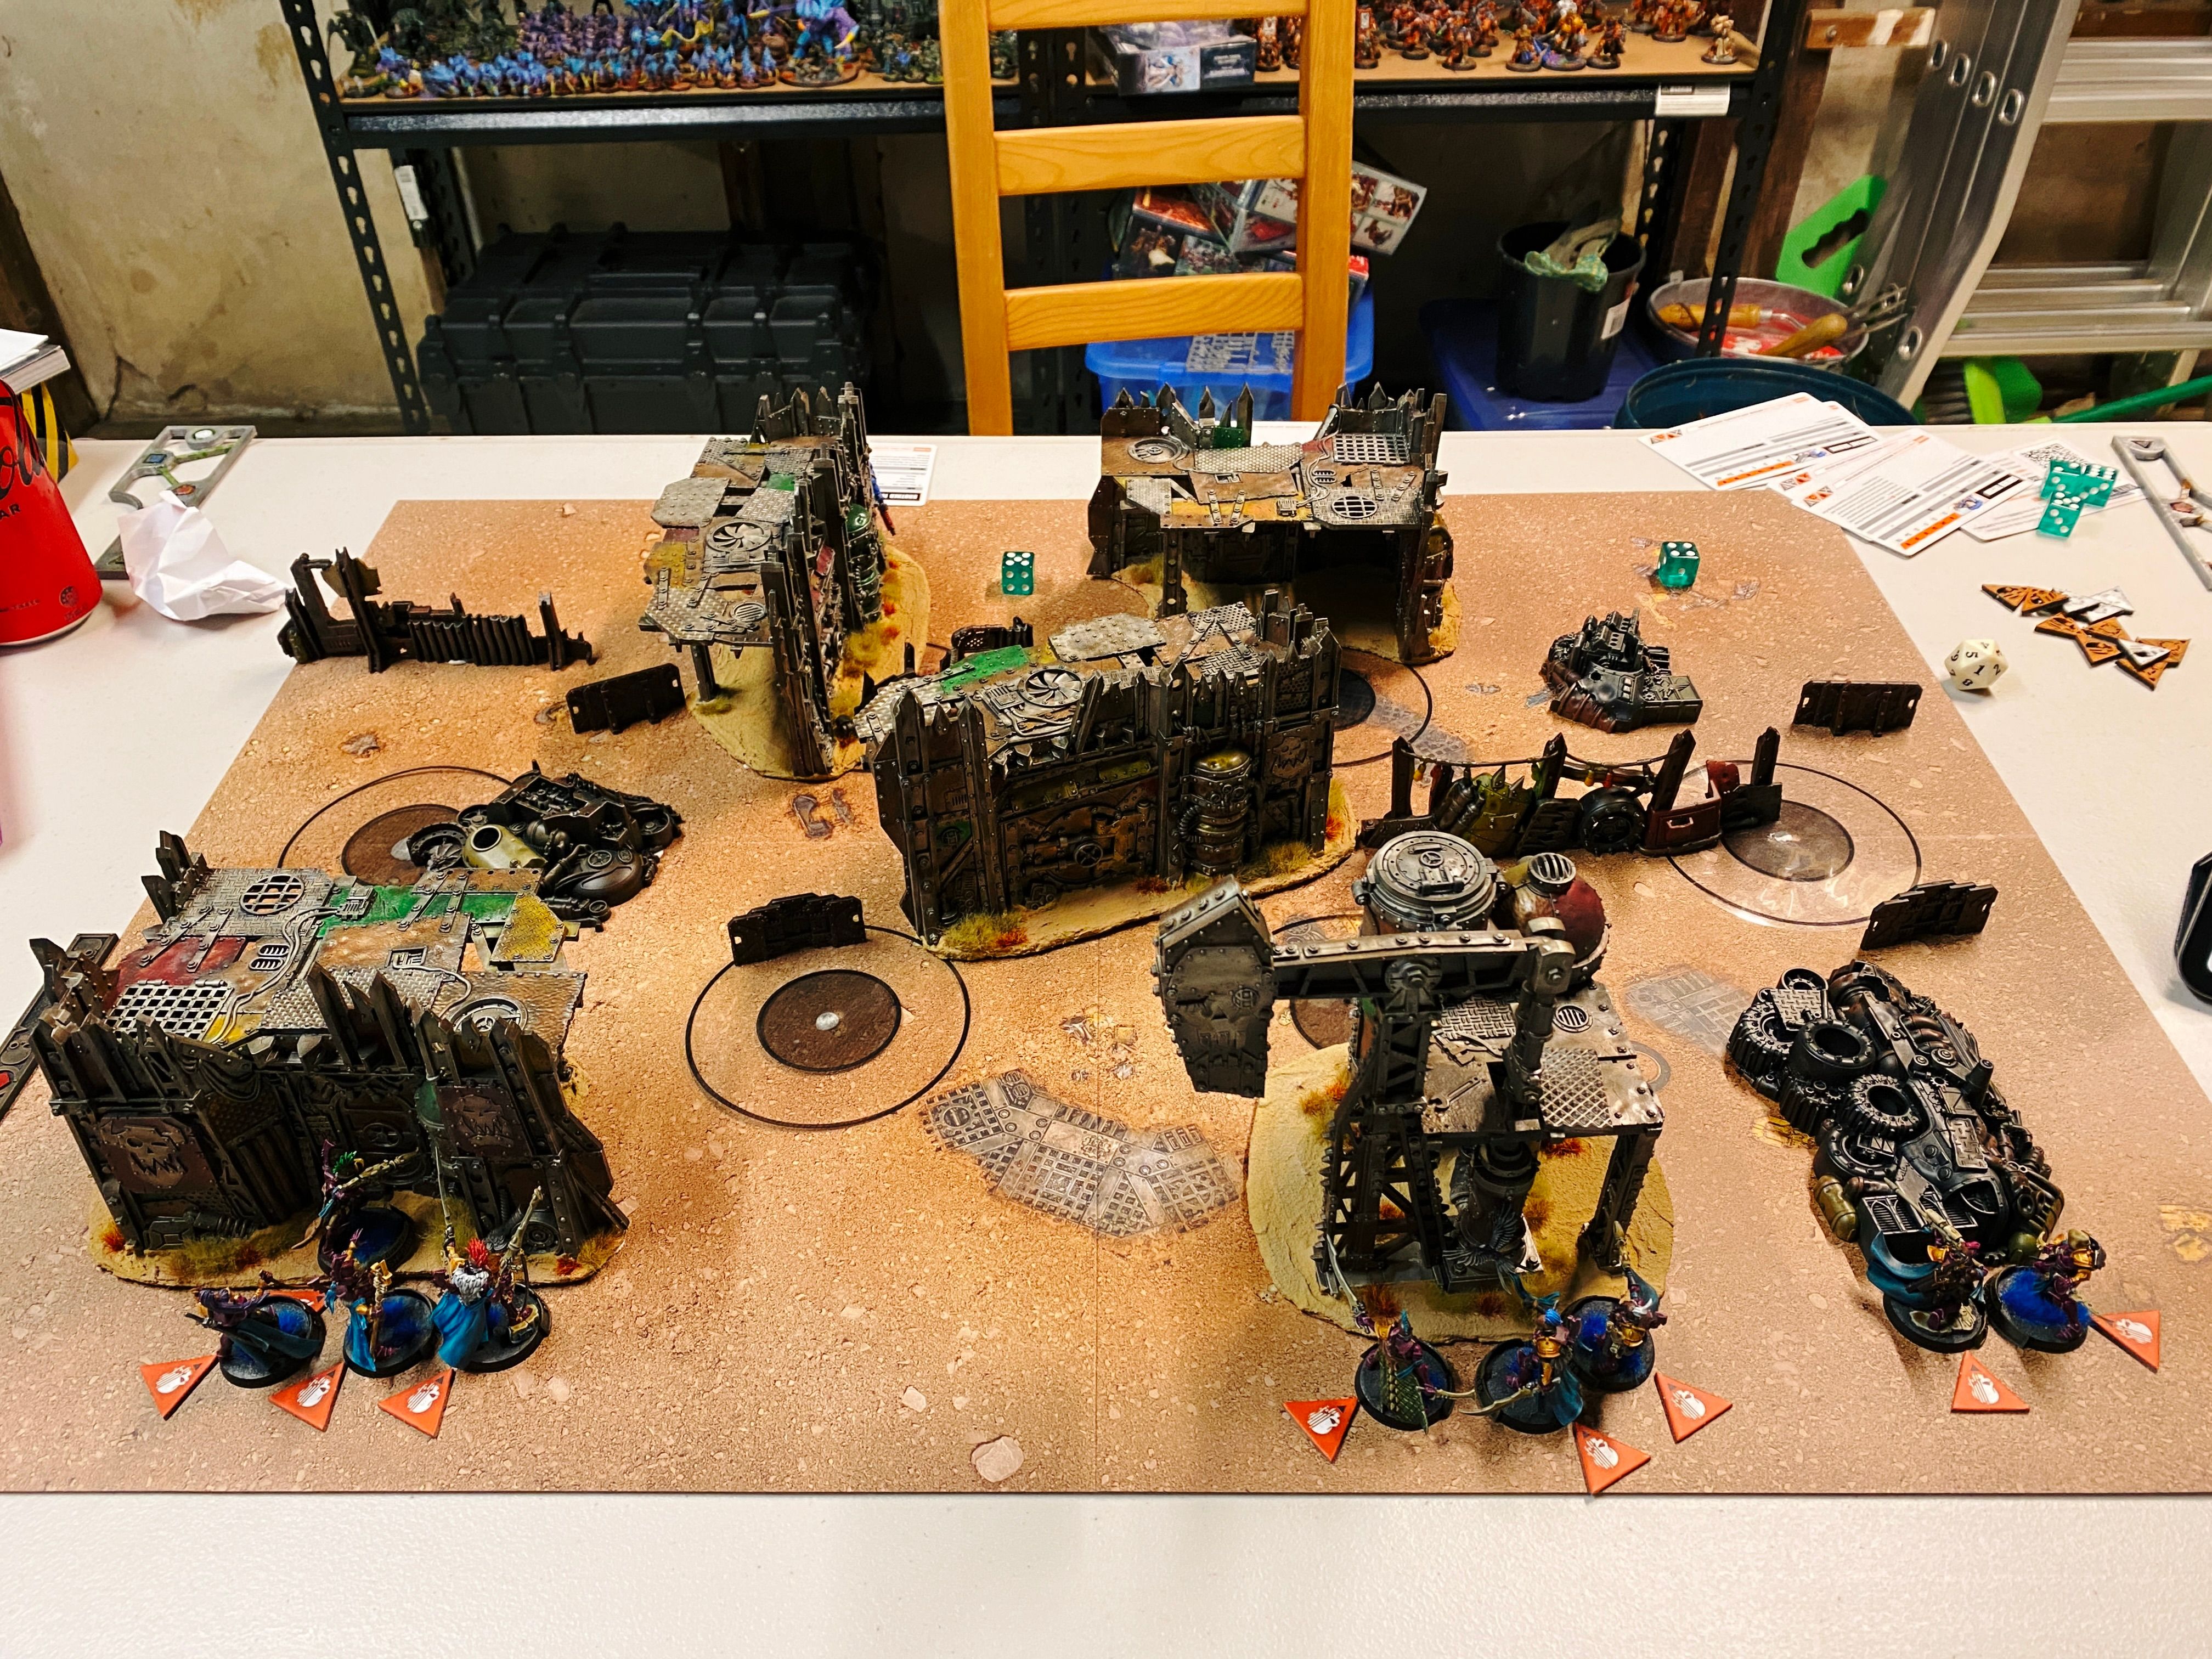 A photo of the board at the start of a game of Warhammer 40,000: Kill Team. The terrain is Ork-style and the structures look like like a junkyard and are very ramshackle. Closest to the camera are my Coirsair Voidscarred, basically lithe space elves in fuchsia armour and turquoise cloaks. I was facing Space Marines but you can't see them in the photo because they're all in cover and not visible from this point.